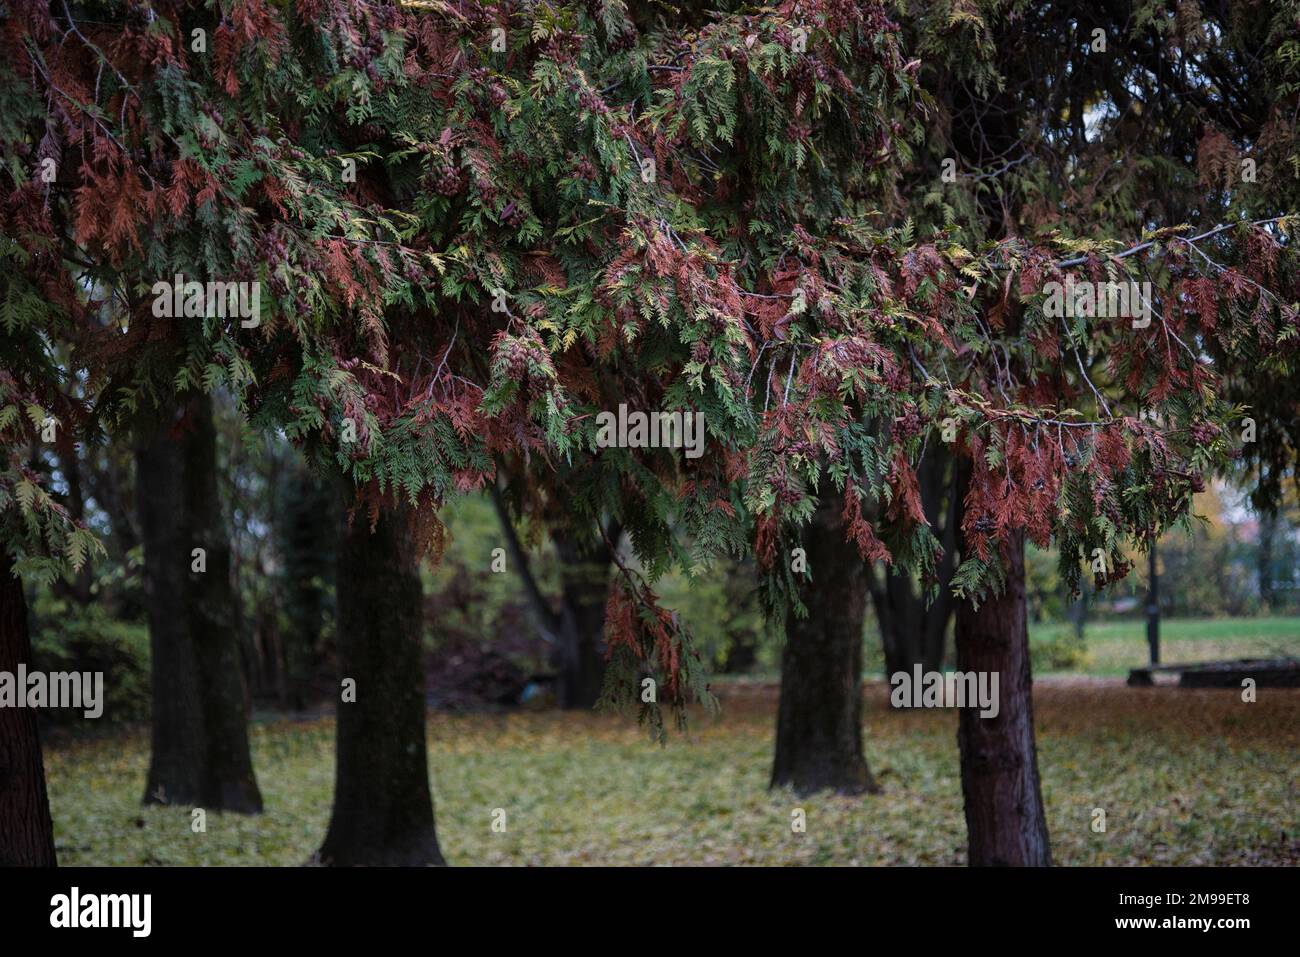 Tanning Canadian cedars in the park in wonderful autumn colors. Stock Photo